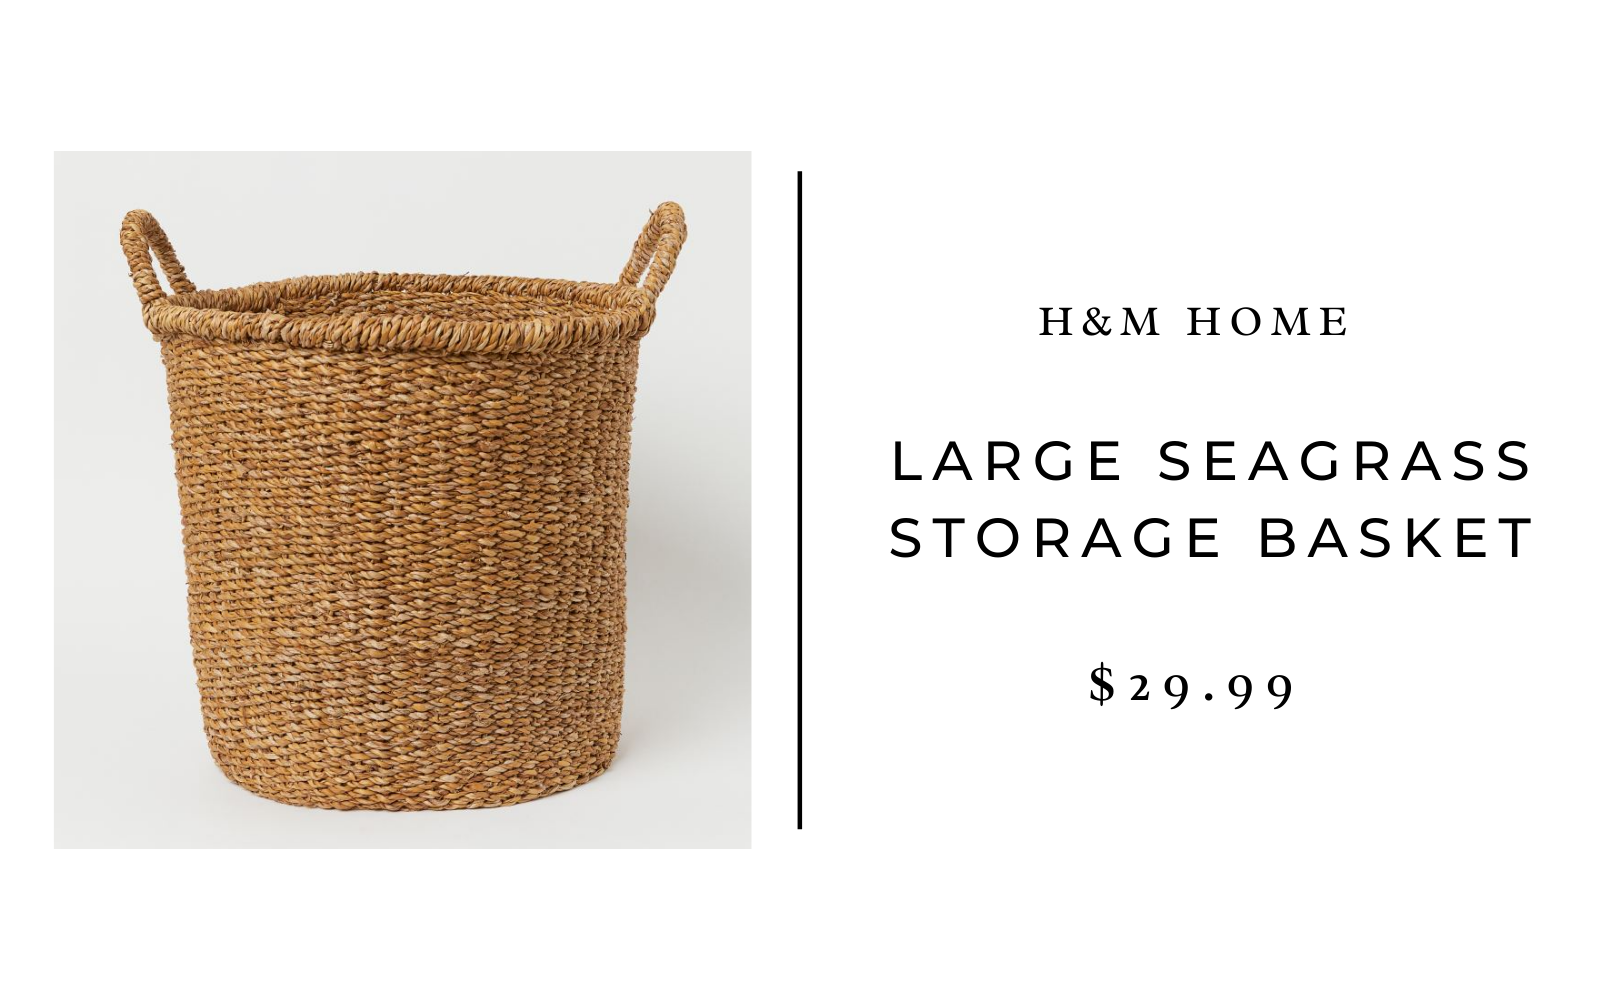 H&M Home Large Seagrass Storage Basket